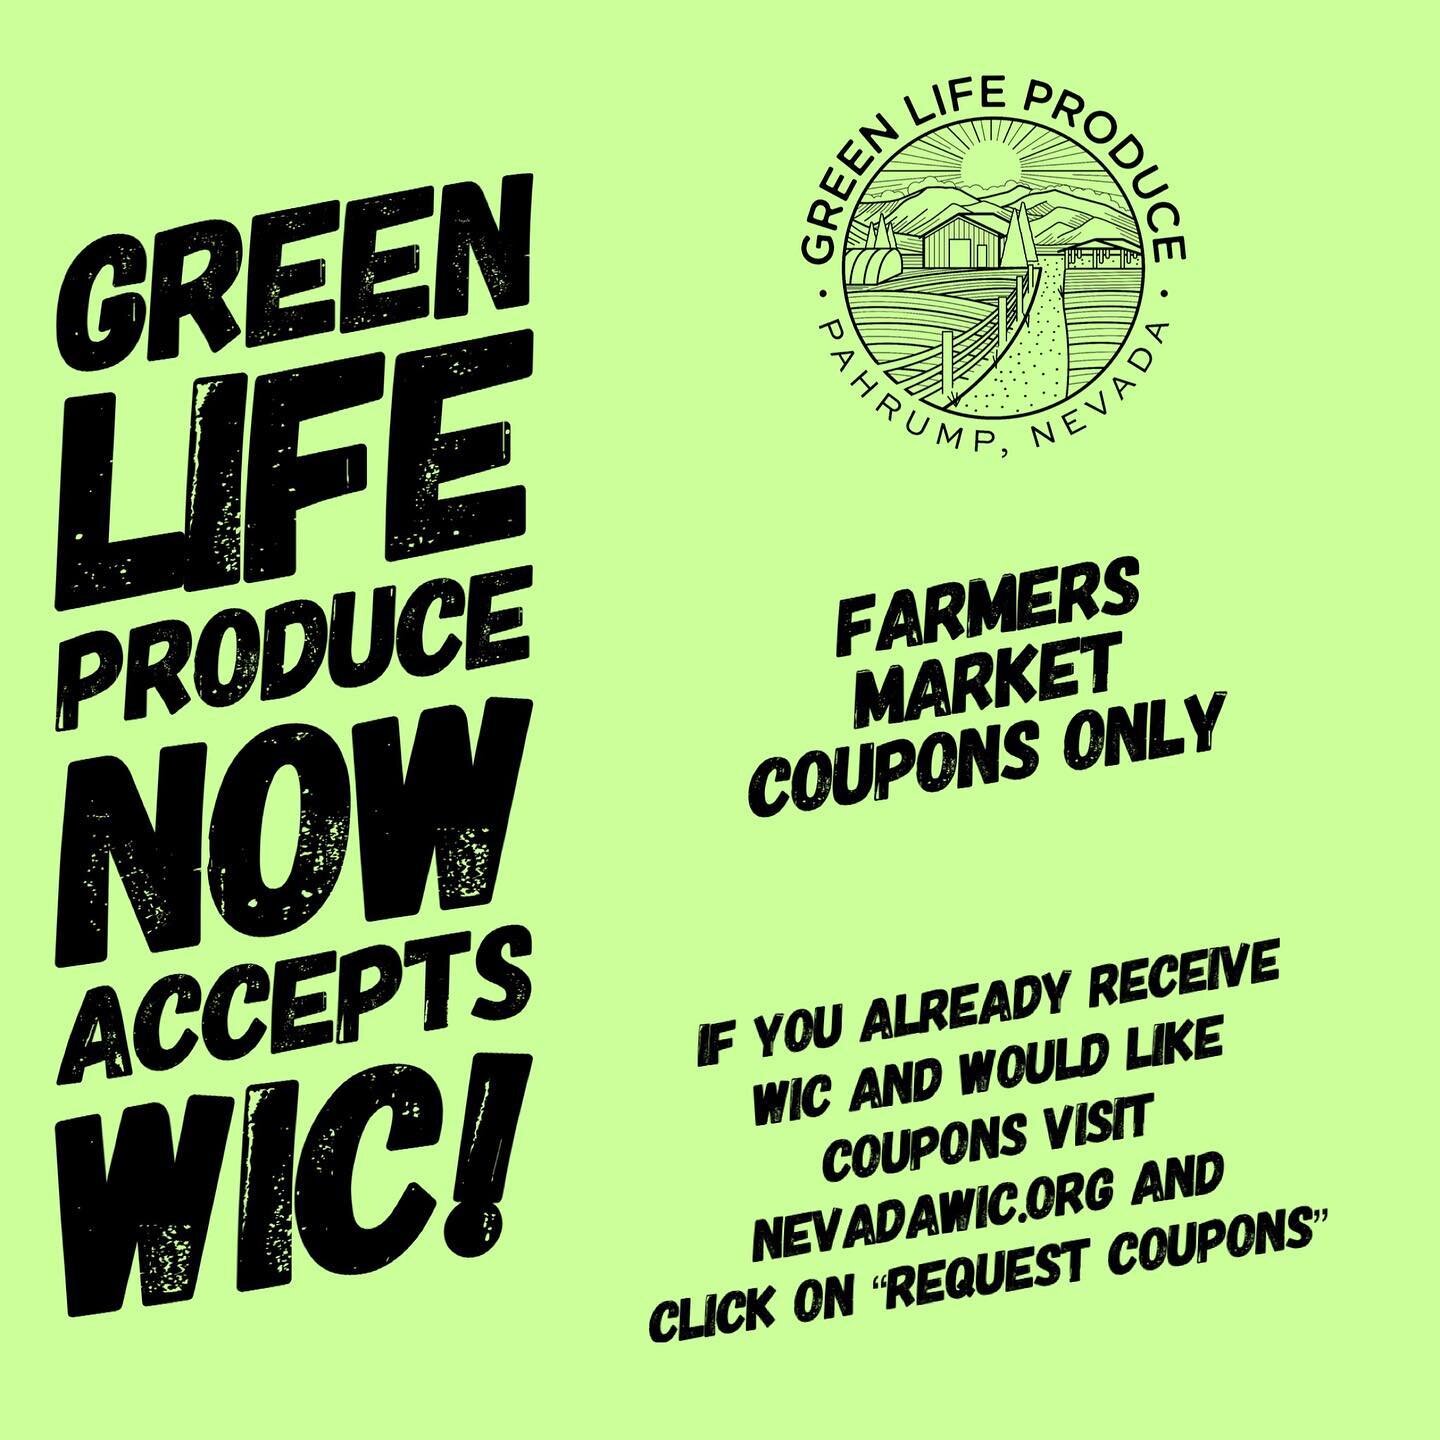 Now accepting WIC farmers market coupons. To request coupons visit nevadawic.org